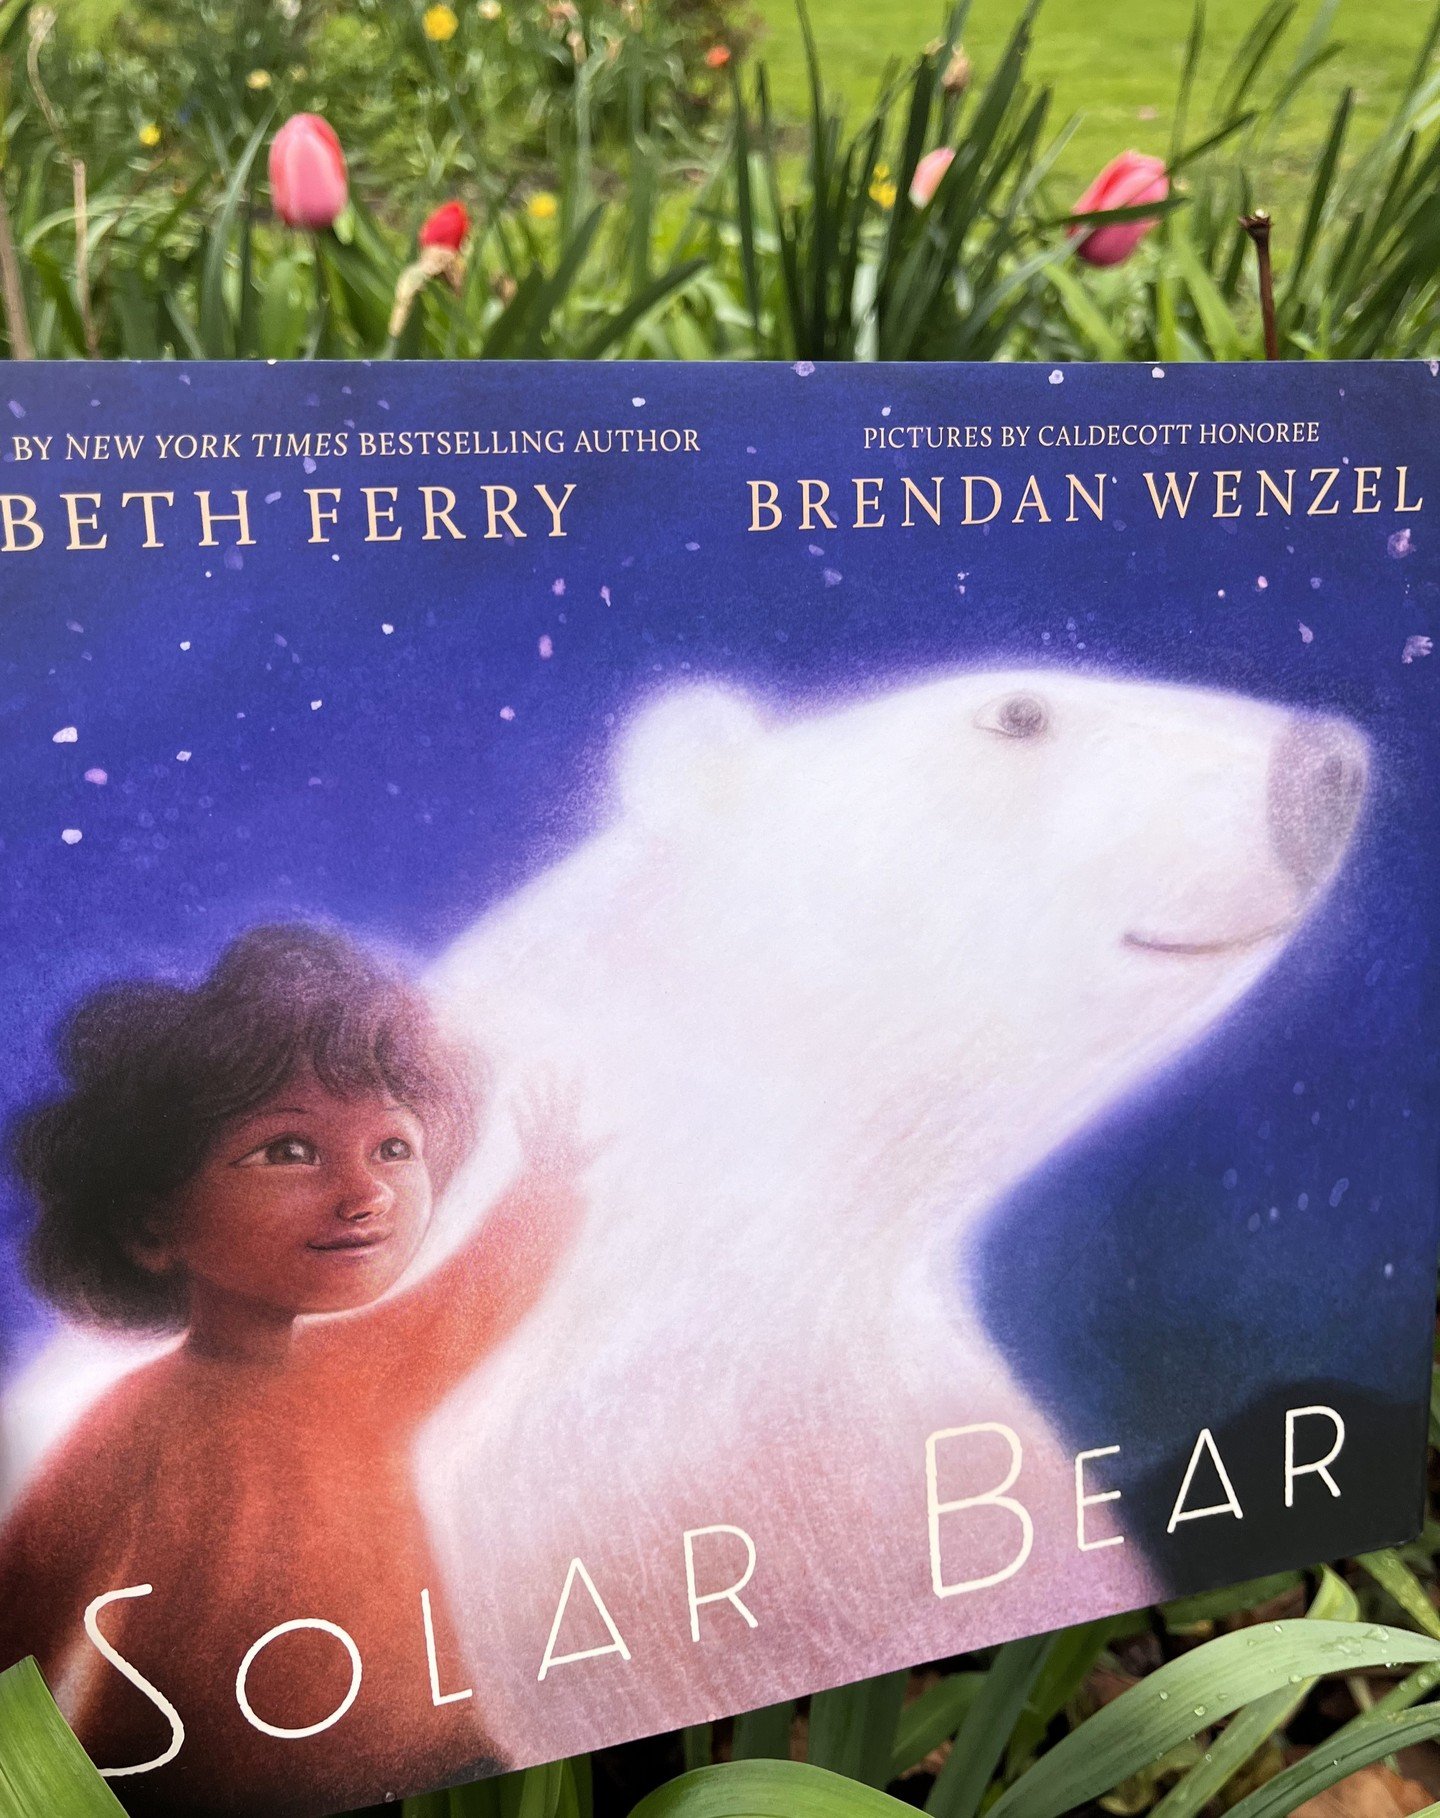 The St. Vartan Park garden is set for a special part of tomorrow's St. Vartan Park Earth Celebration. 

We'll give out free copies of the celebrated new children's book Solar Bear to young attendees. 

Solar Bear&rsquo;s illustrator @brendan_wenzel w